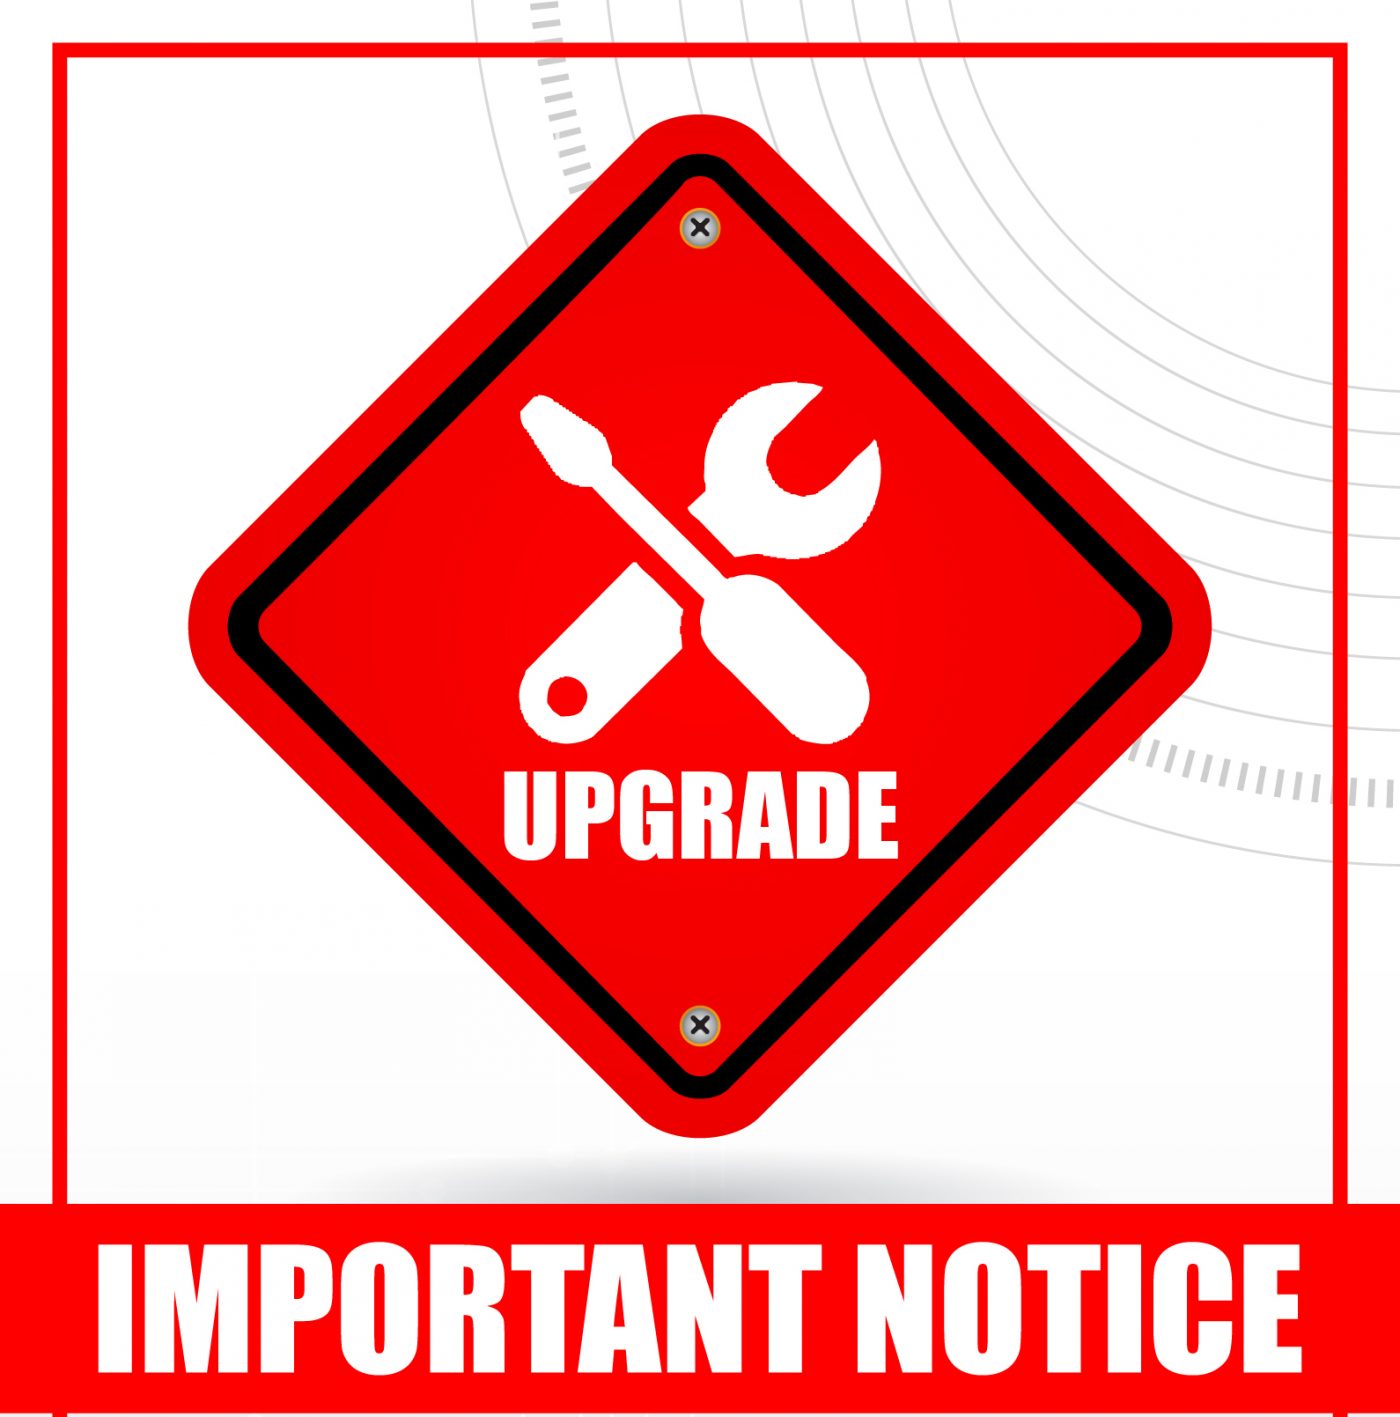 Network Coverage Upgrade [Important Notice] - 